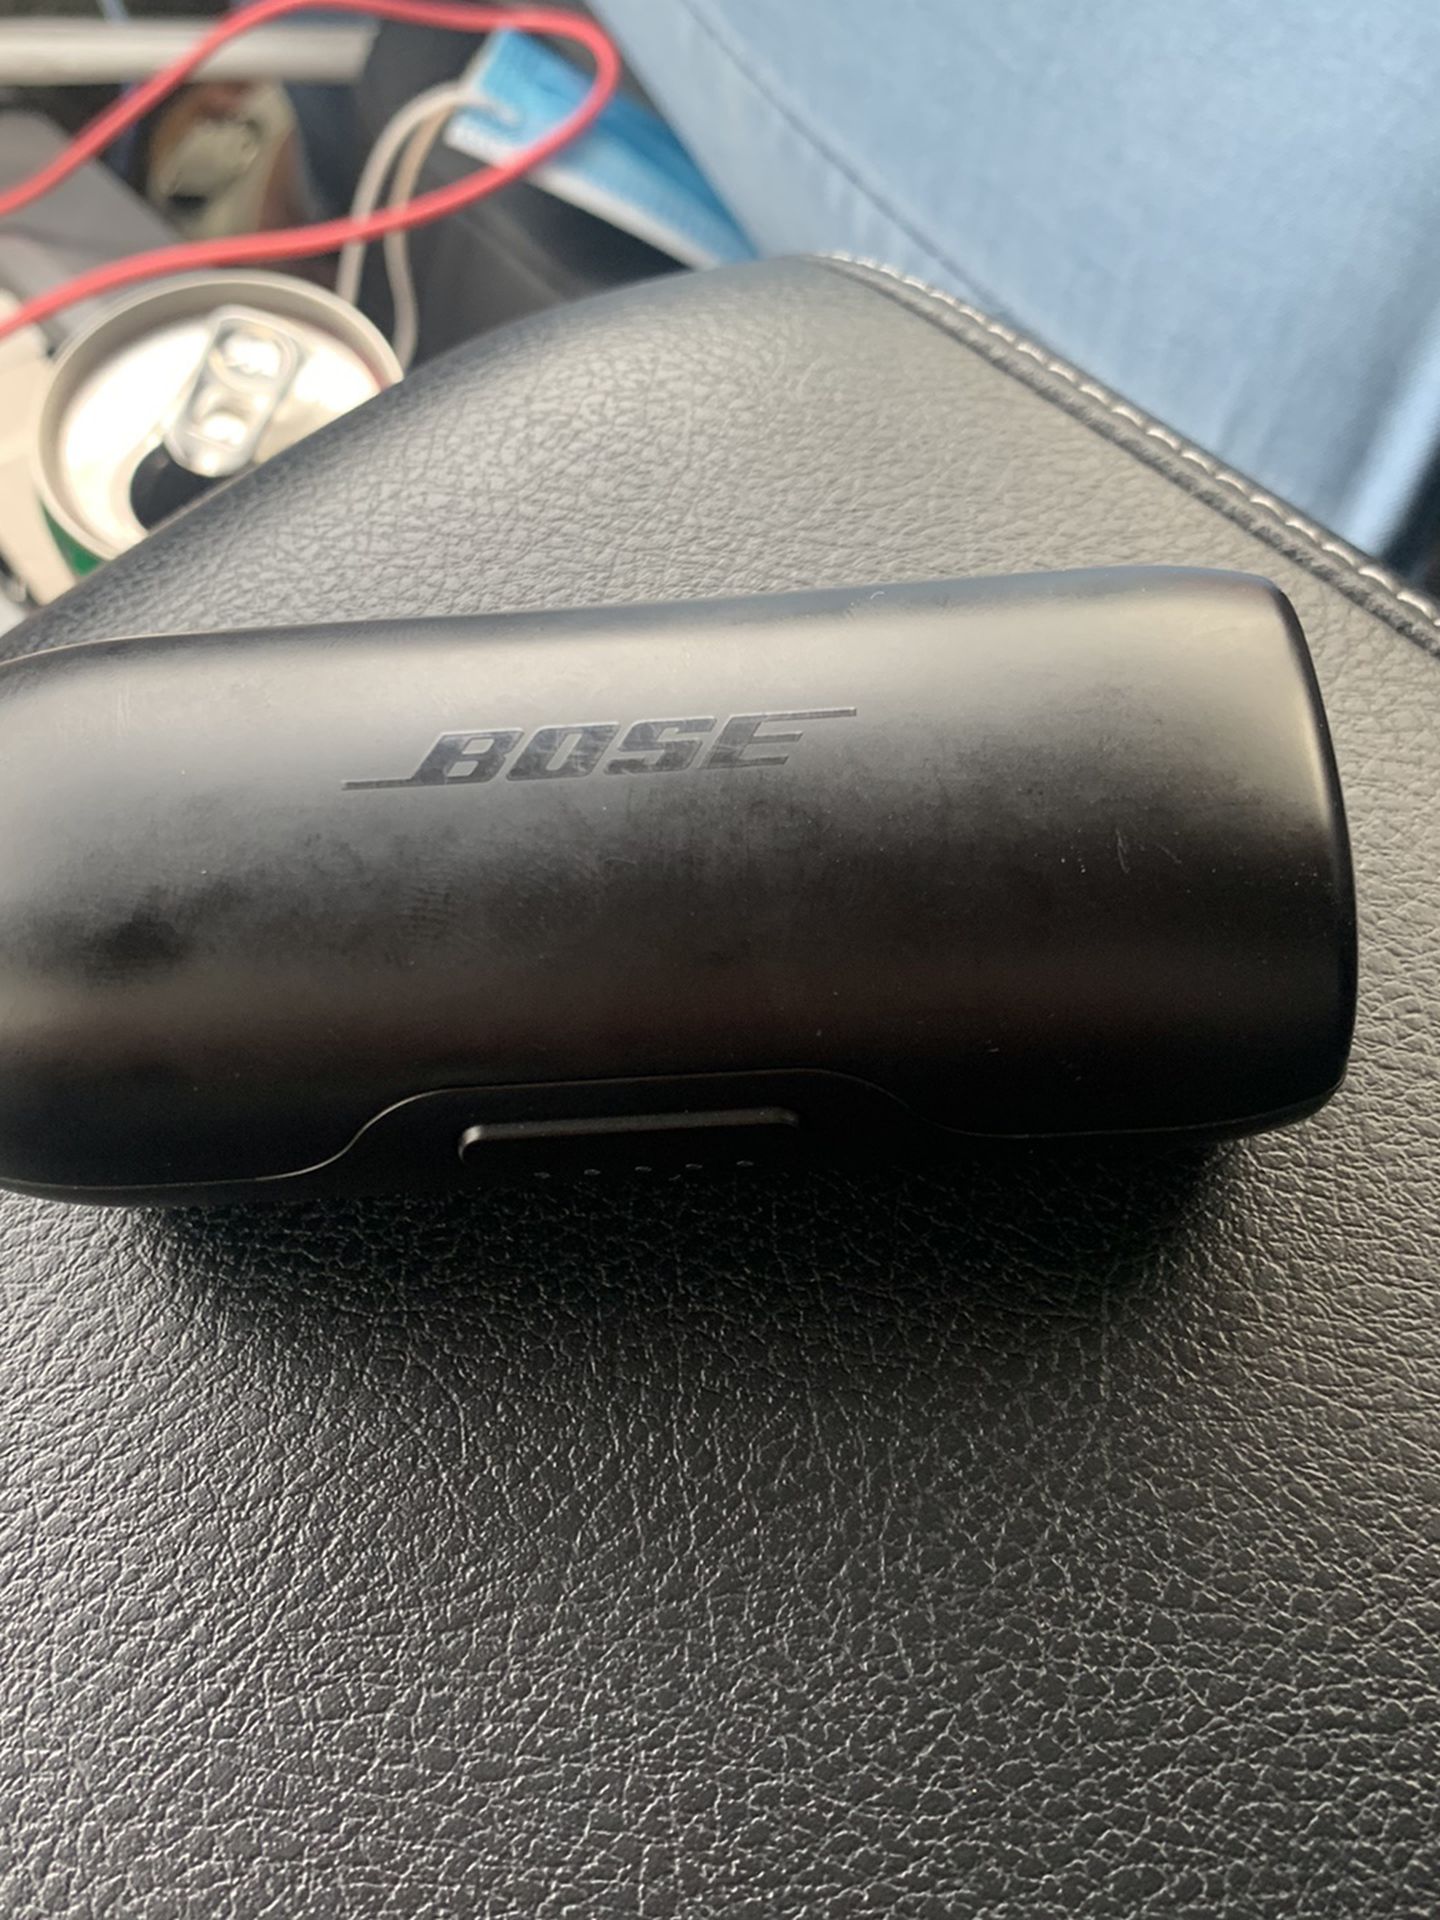 Bose AirPods